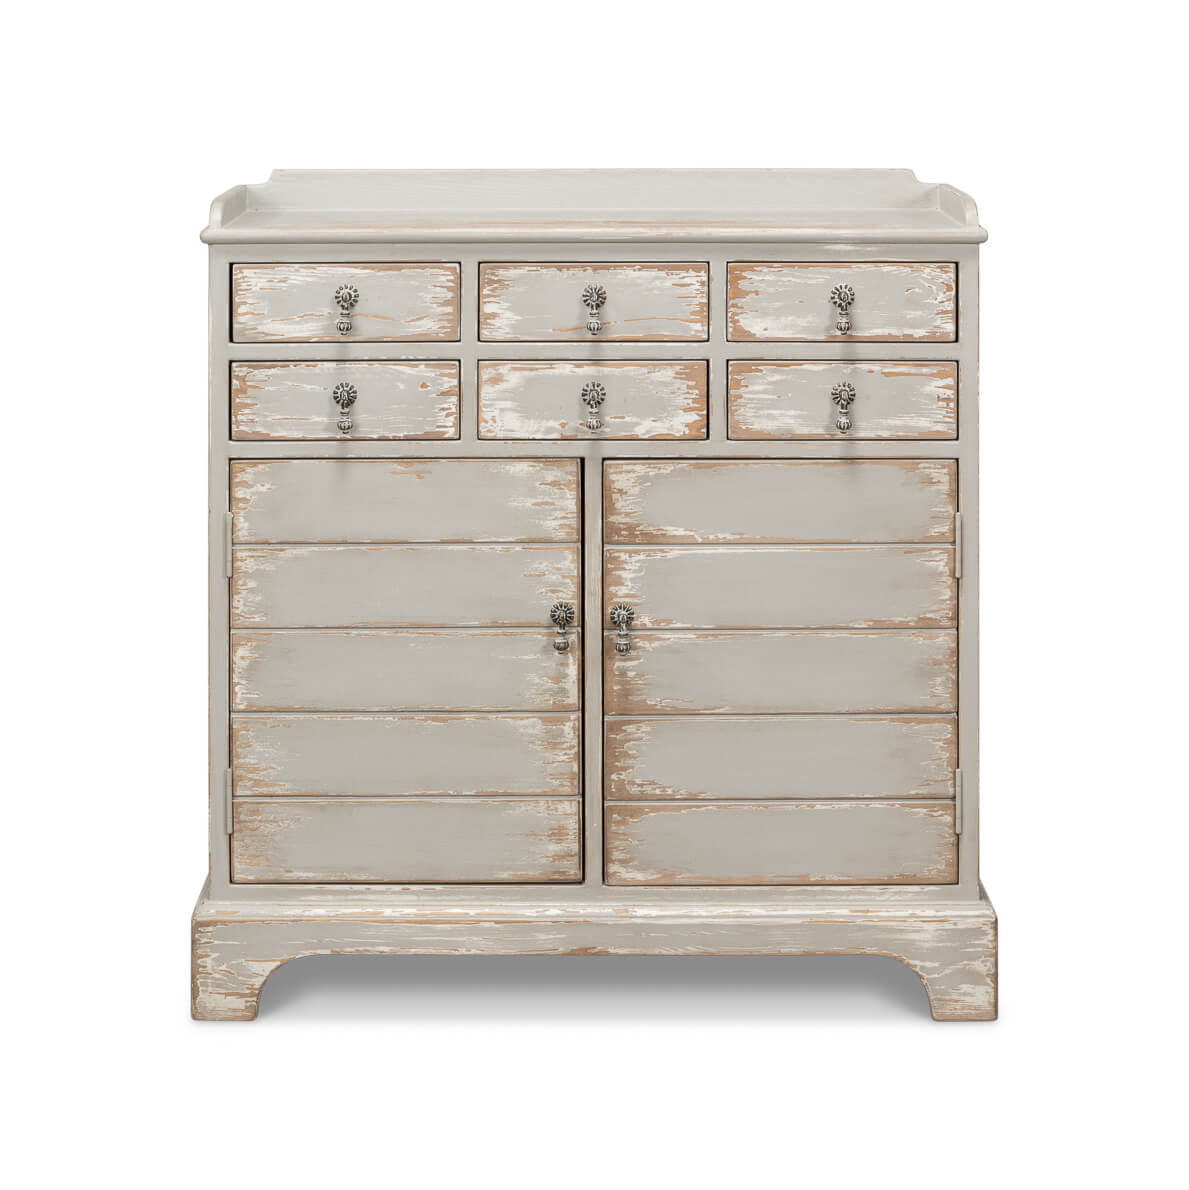 Antiqued Painted Country Chest - English Georgian America